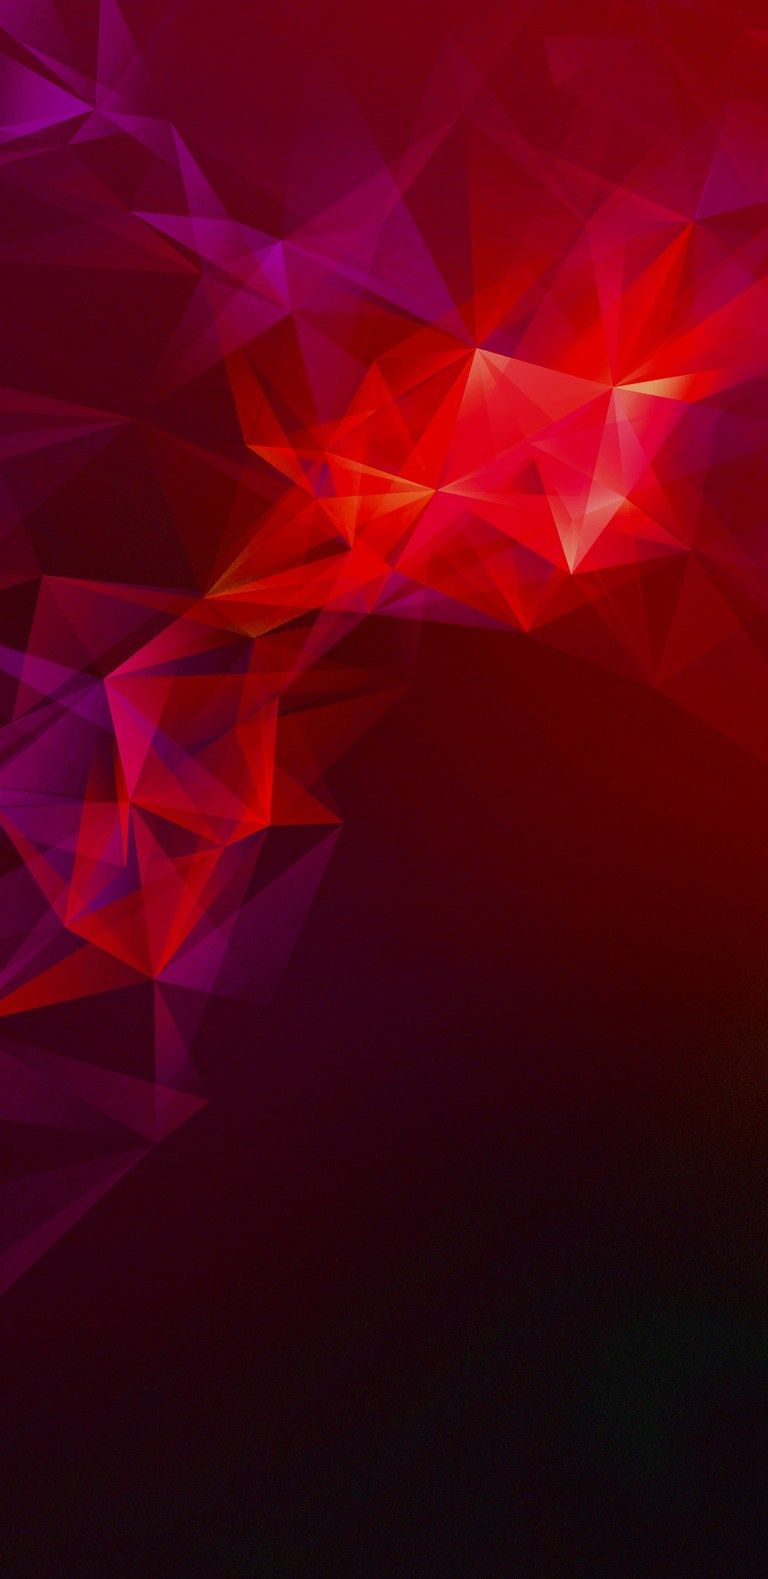 Official Wallpaper 08 of 15 for Samsung Galaxy S9 and Samsung Galaxy Swith Dark Red Polygons Wallpaper. Wallpaper Download. High Resolution Wallpape. Samsung galaxy wallpaper, Samsung wallpaper, Galaxy wallpaper